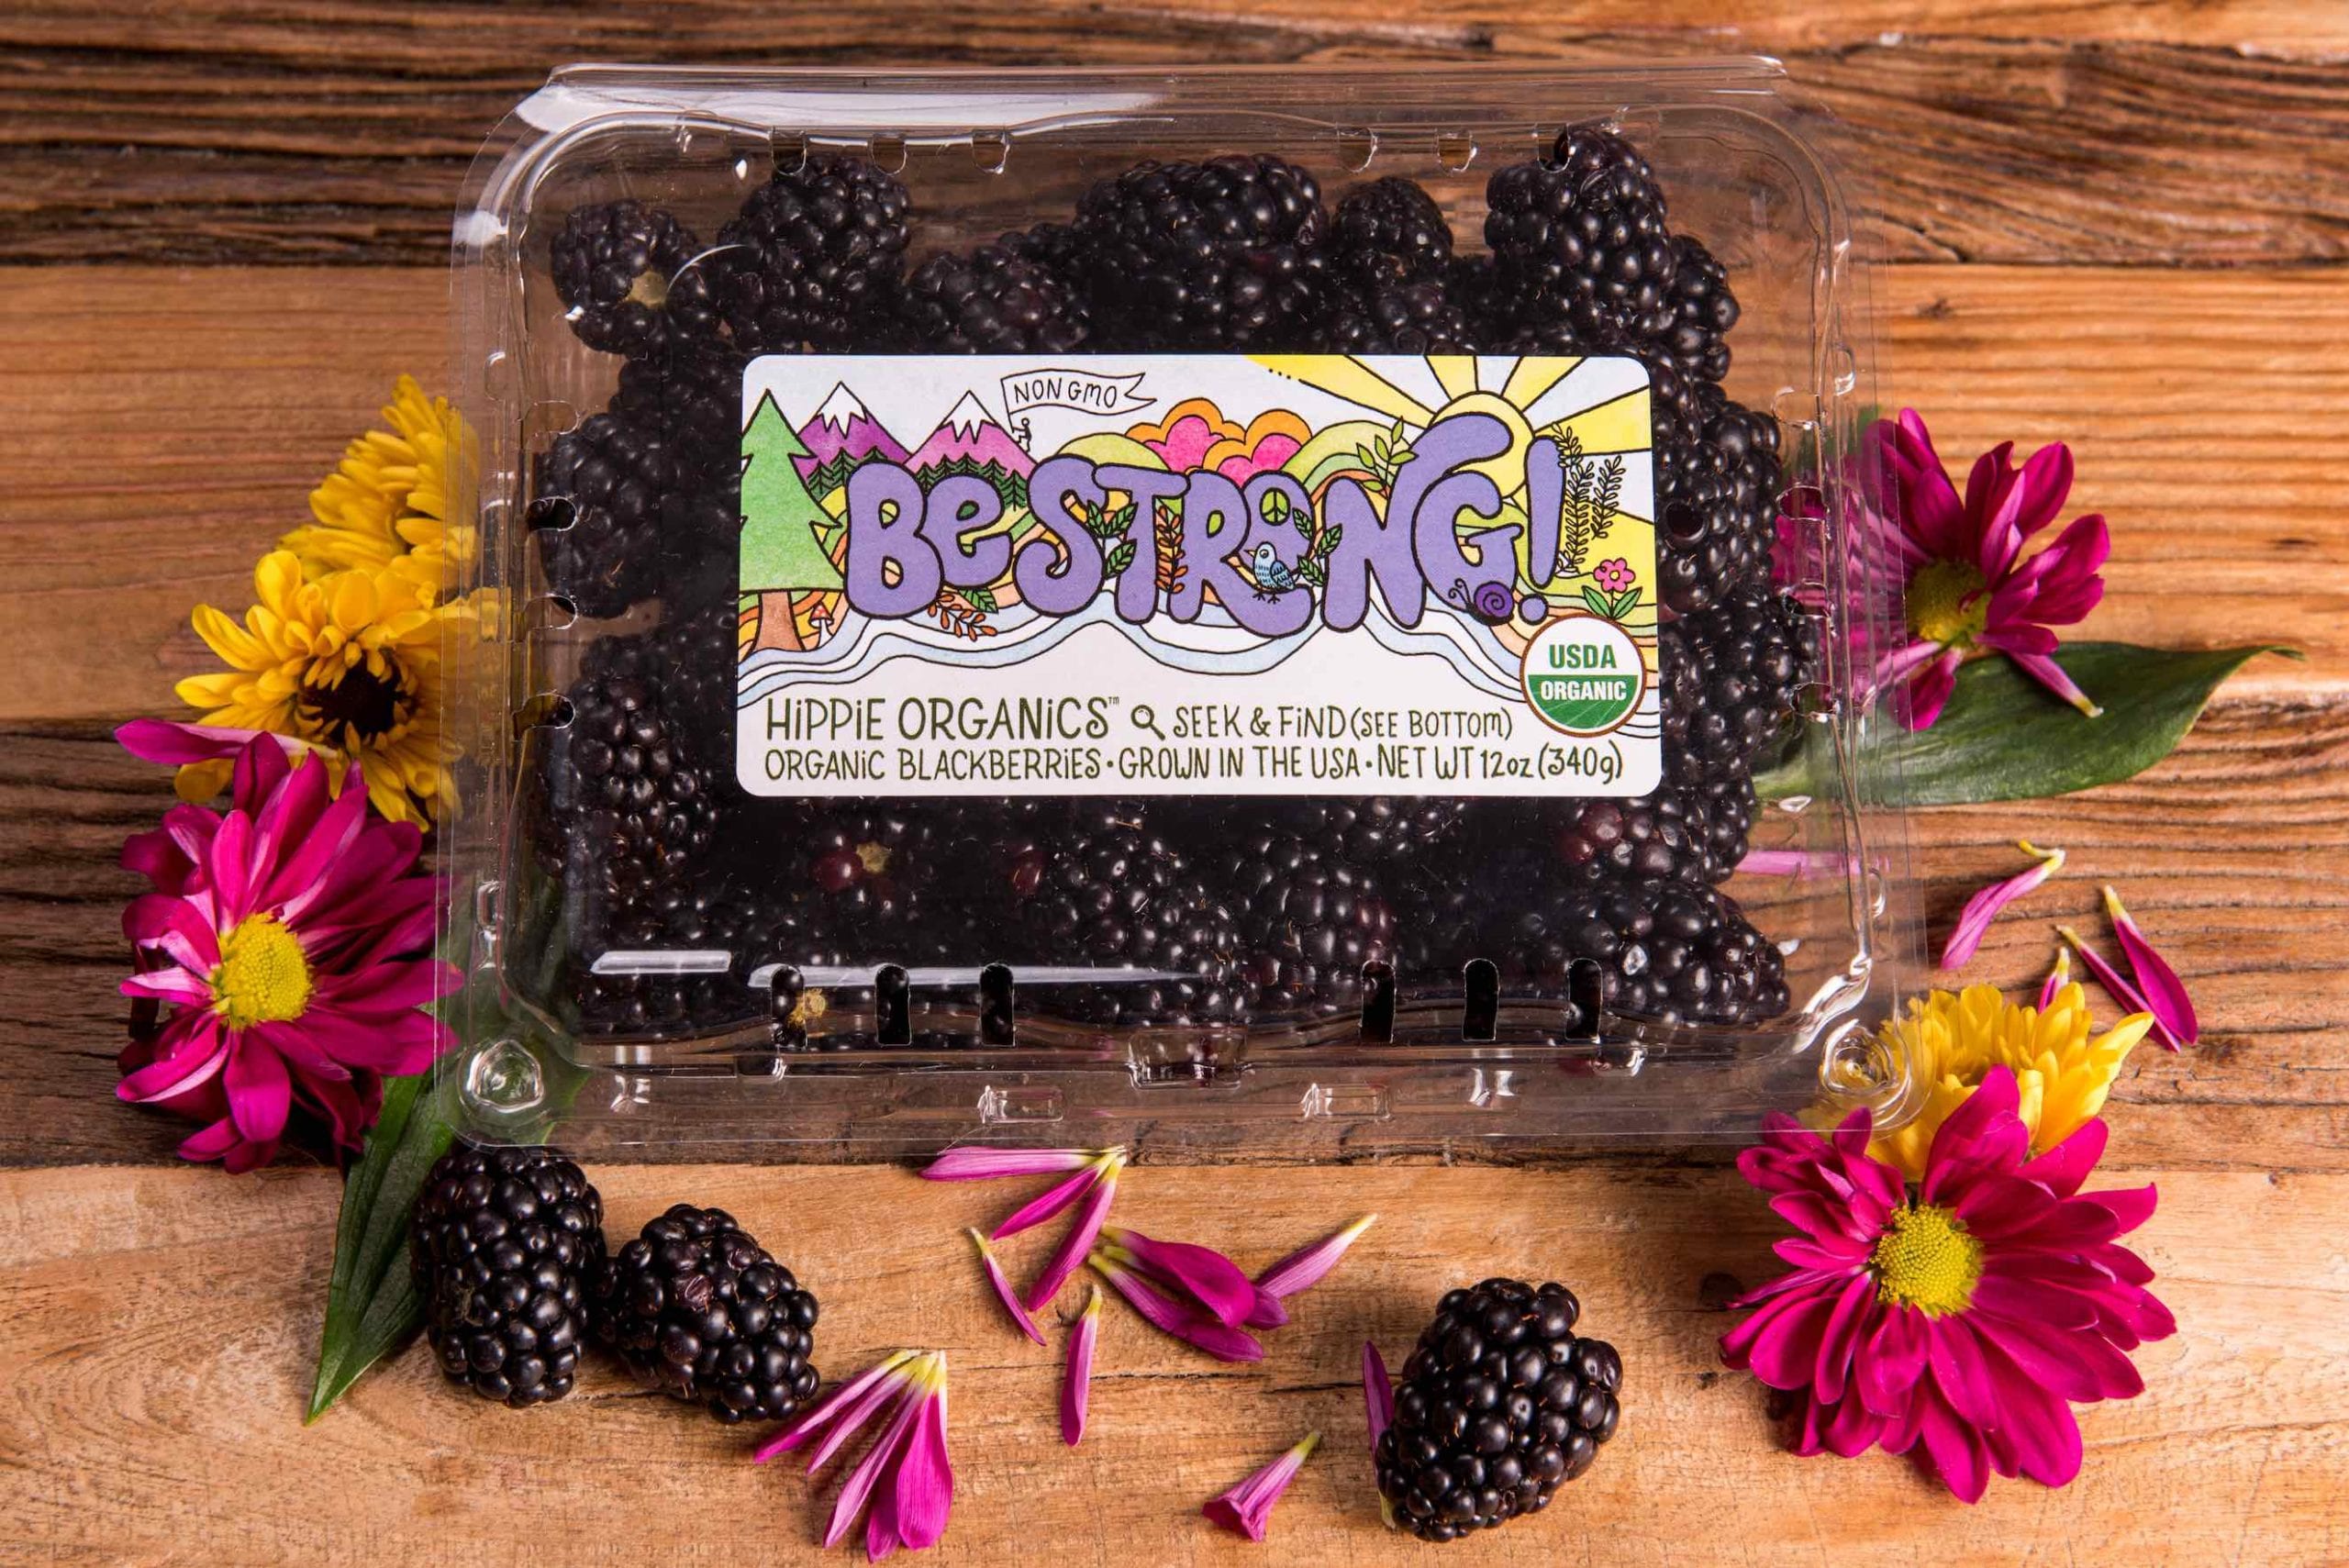 Aerial closeup view of package of organic blackberries surrounded by flowers